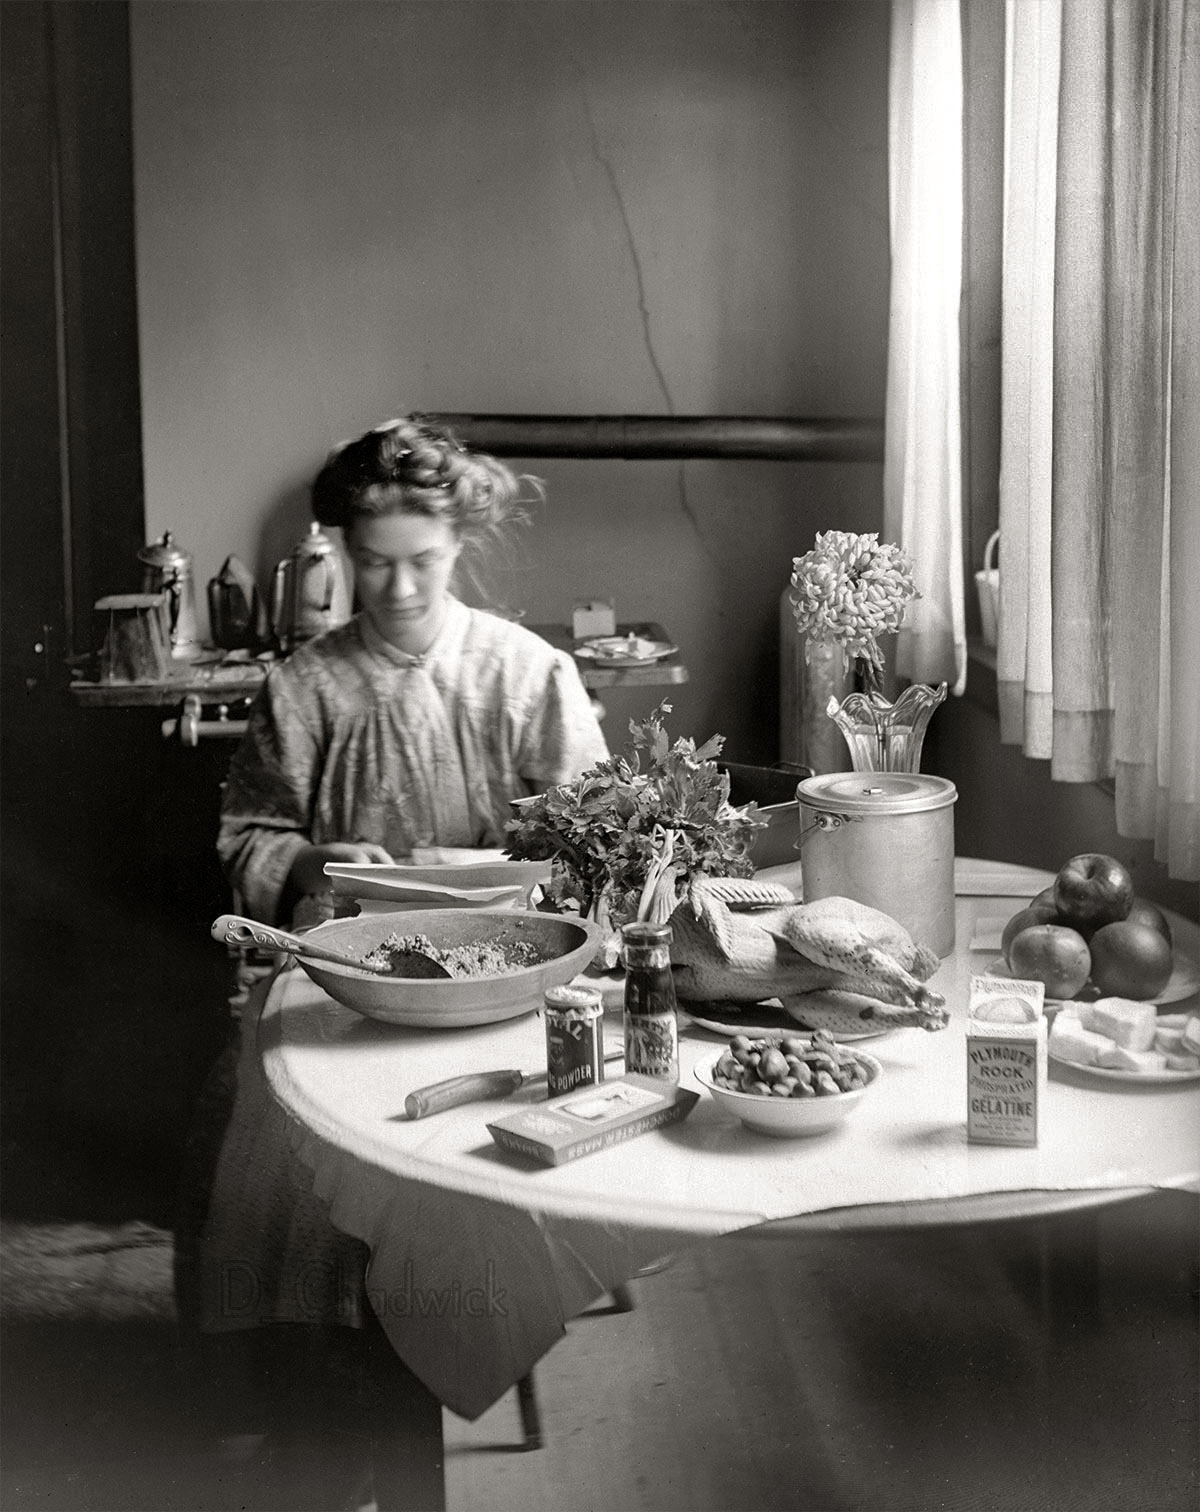 Circa 1910. Mixing up a big batch of "Salmonella Surprise." Scanned from the original 4x5 inch glass negative. View full size.